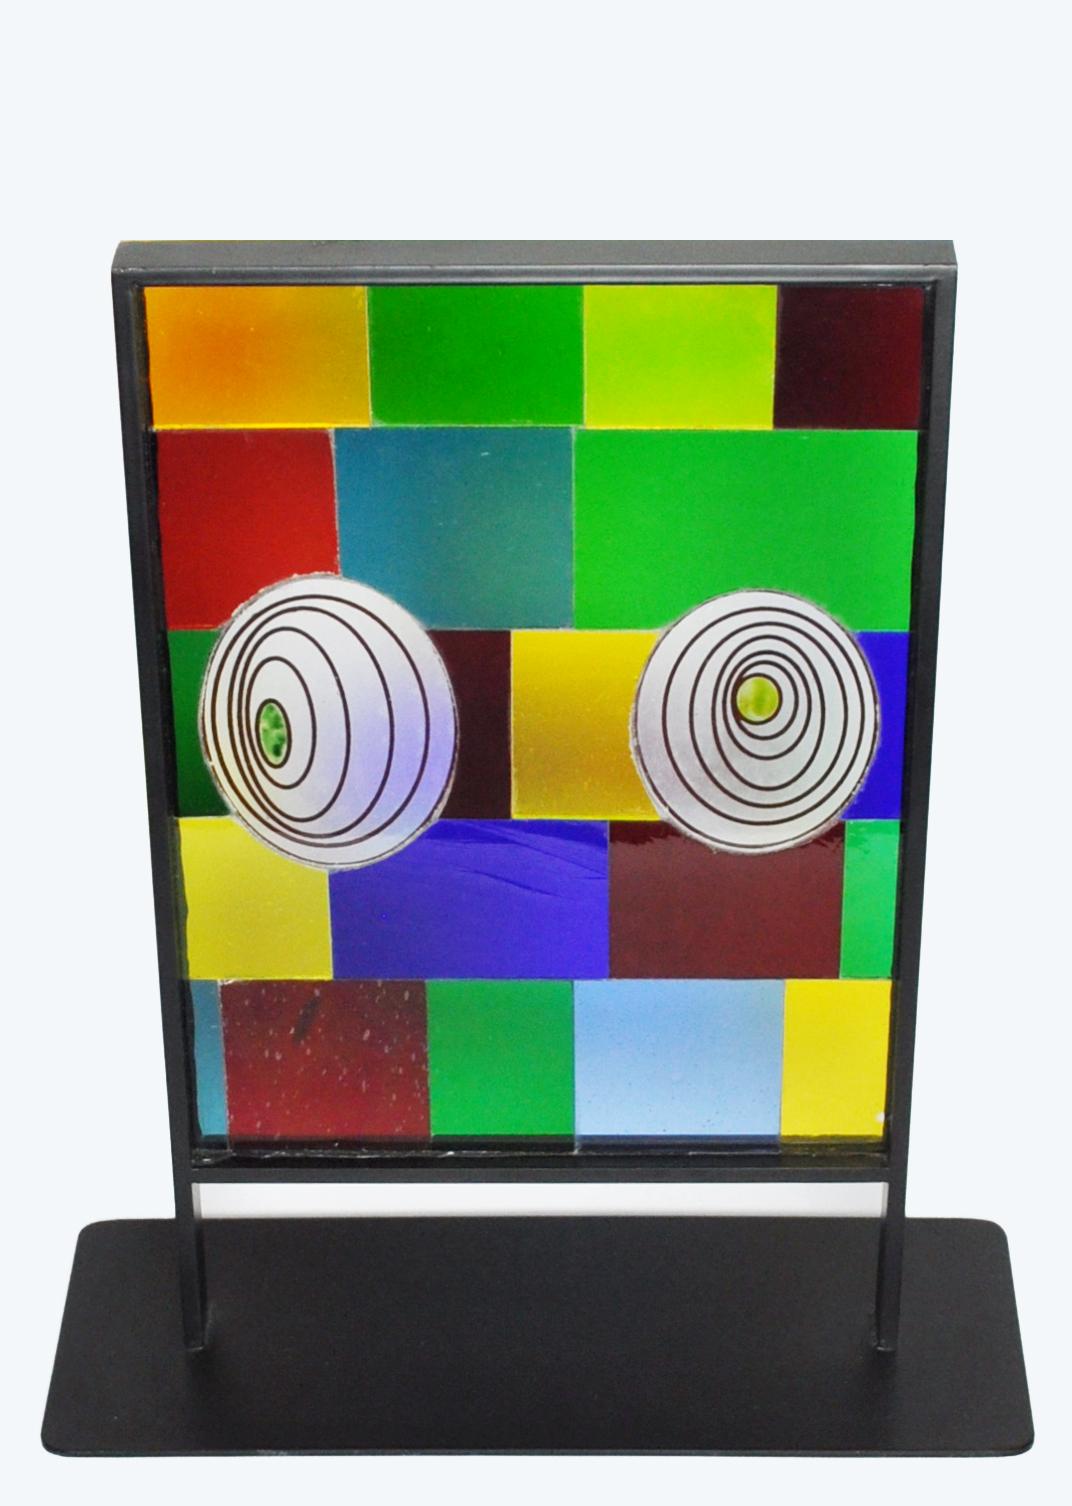 Peter Stuhr Abstract Sculpture - Contemporary Abstract Geometric Sculpture "Chameleon"